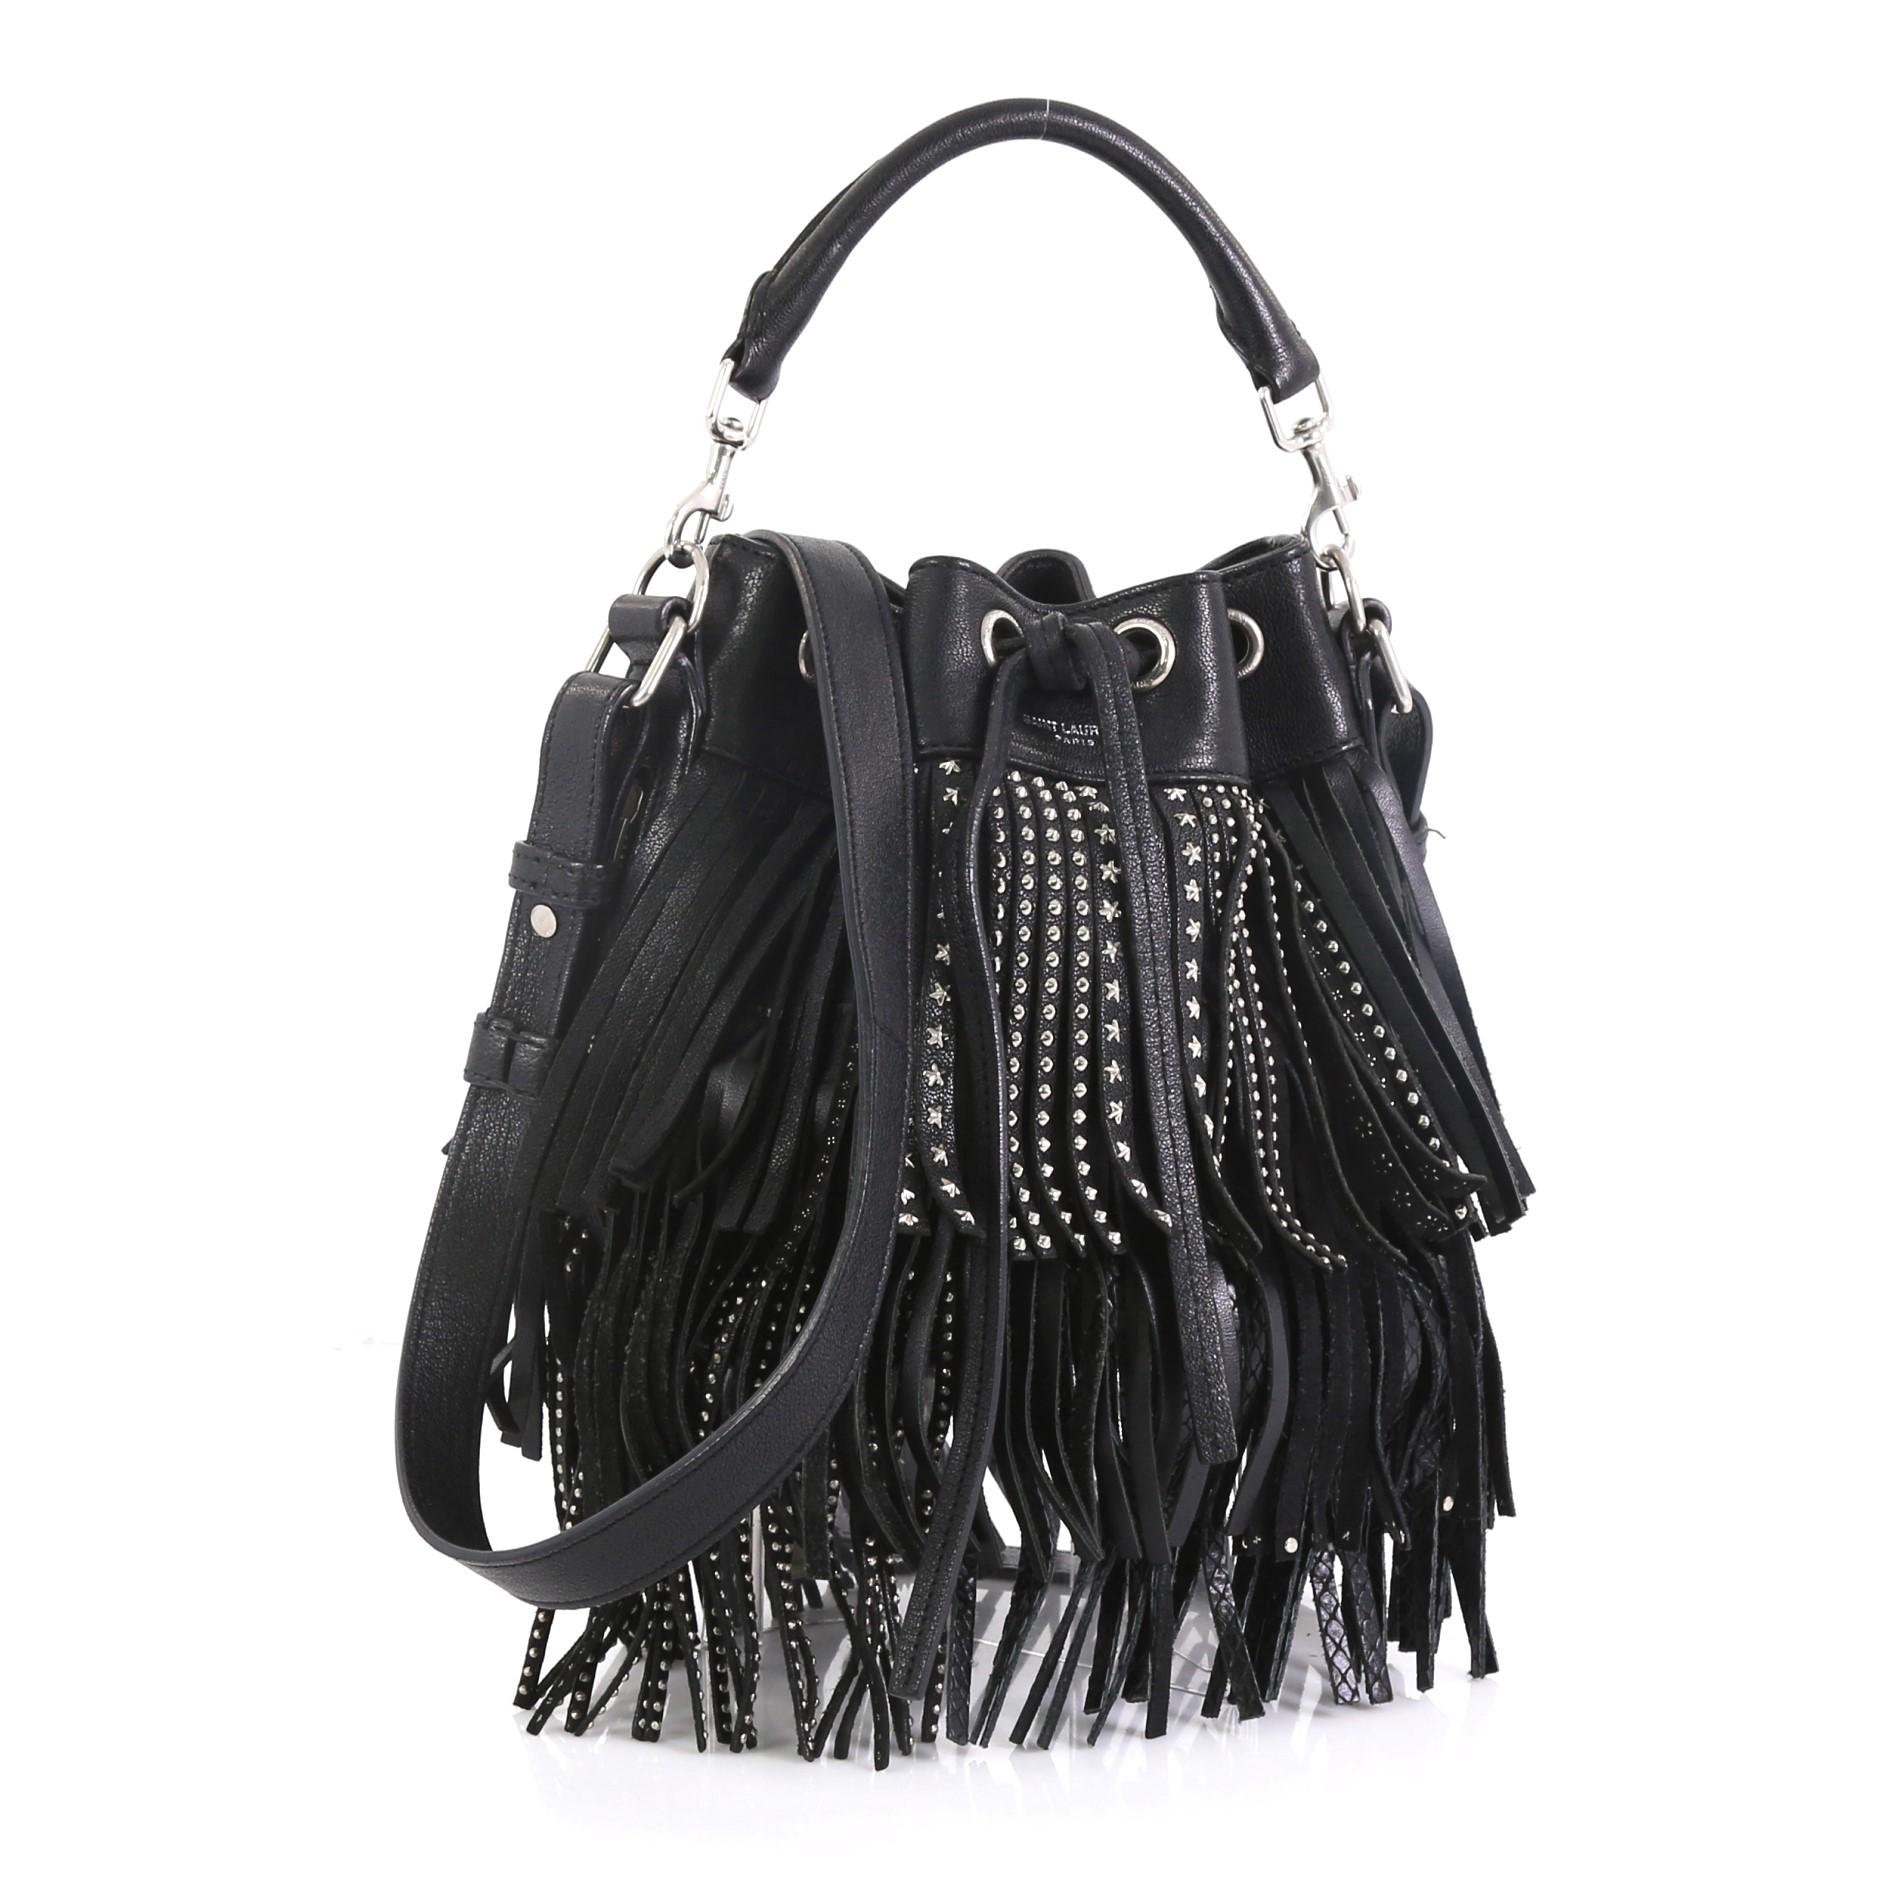 This Saint Laurent Fringe Emmanuelle Bucket Bag Studded Leather Small, crafted in black studded leather, features a detachable looped handle, adjustable leather strap, side zip pocket, fringe detailing and silver-tone hardware. Its drawstring